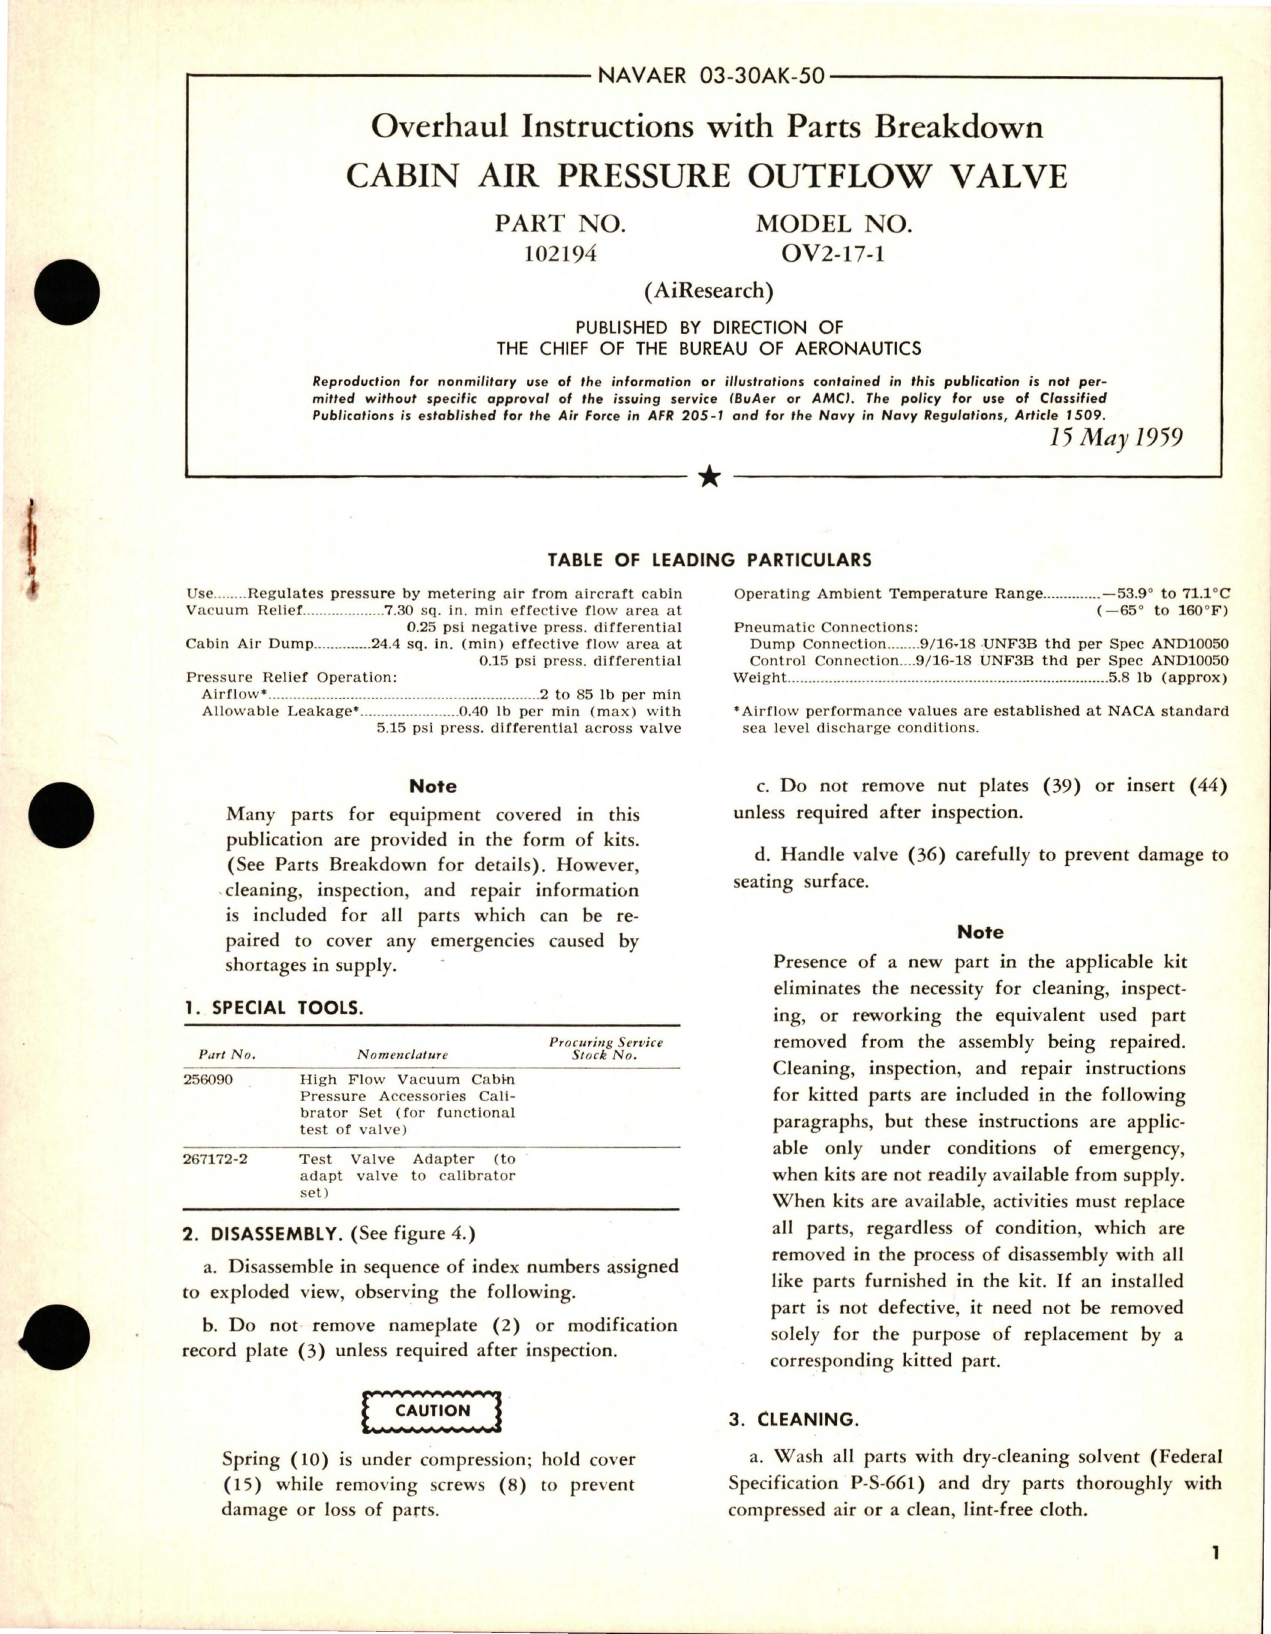 Sample page 1 from AirCorps Library document: Overhaul Instructions with Parts Breakdown for Cabin Air Pressure Outflow Valve - Part 102194 - Model OV2-17-1 